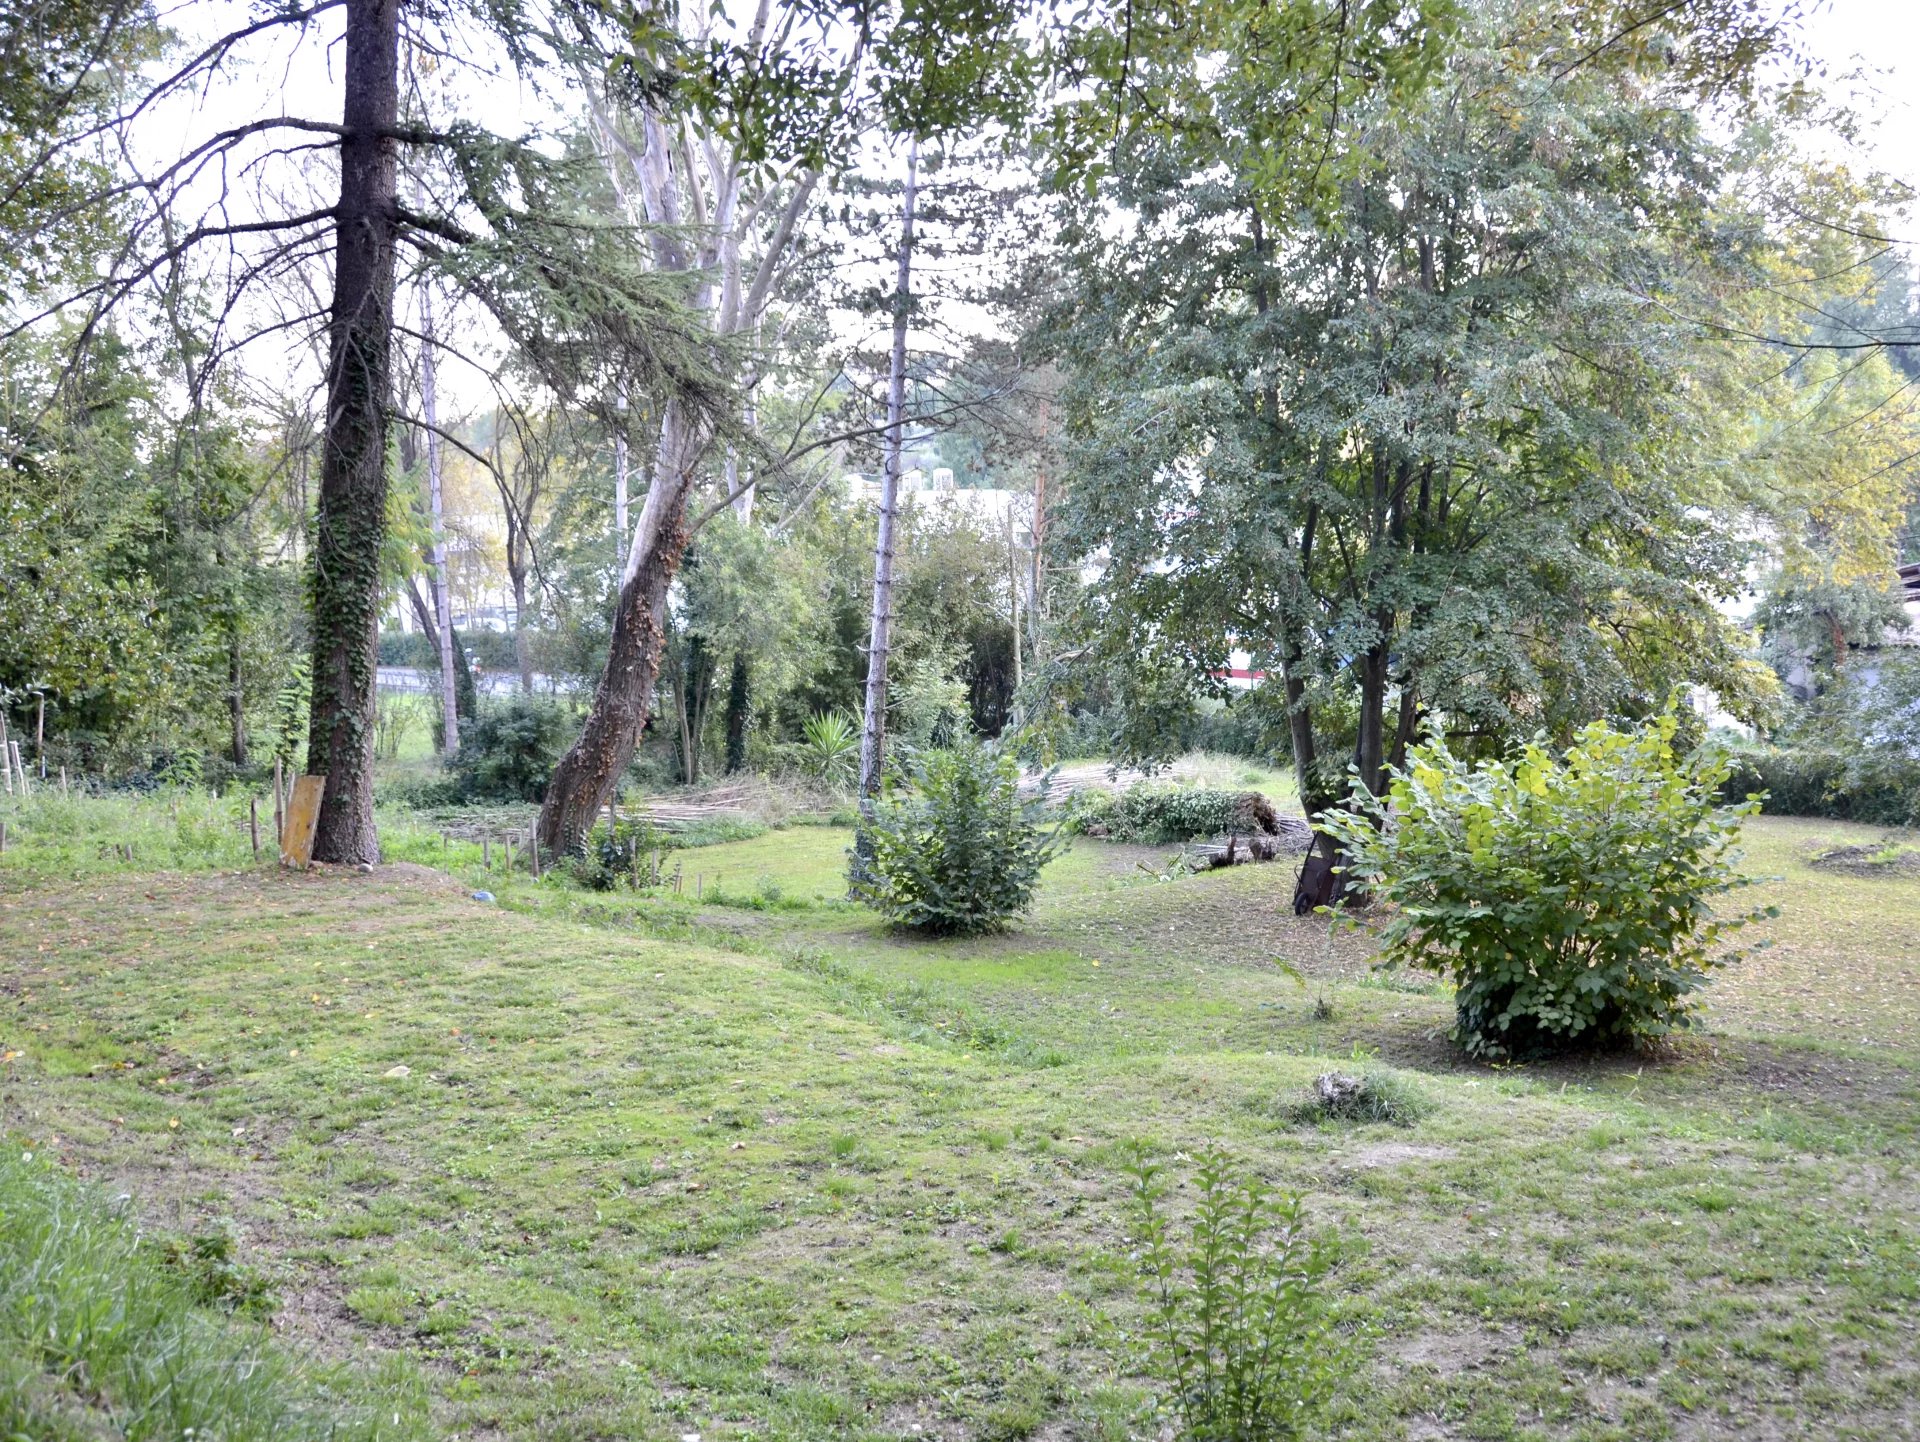 In exclusivity, On St Paul de vence, Building land of about 1000m2